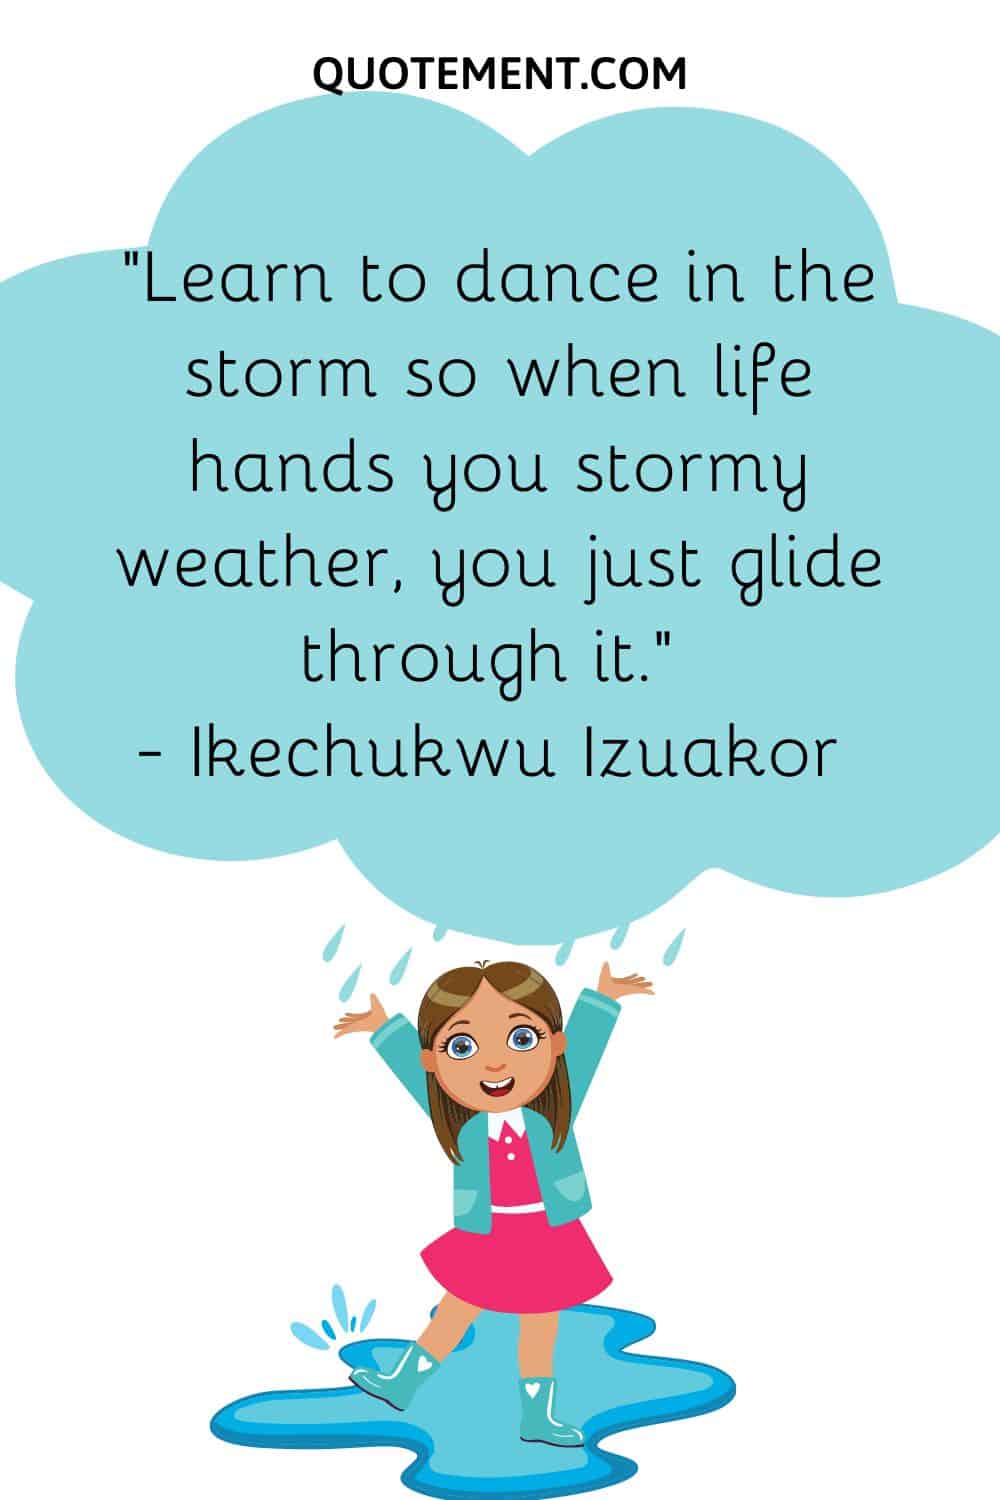 Learn to dance in the storm so when life hands you stormy weather, you just glide through it